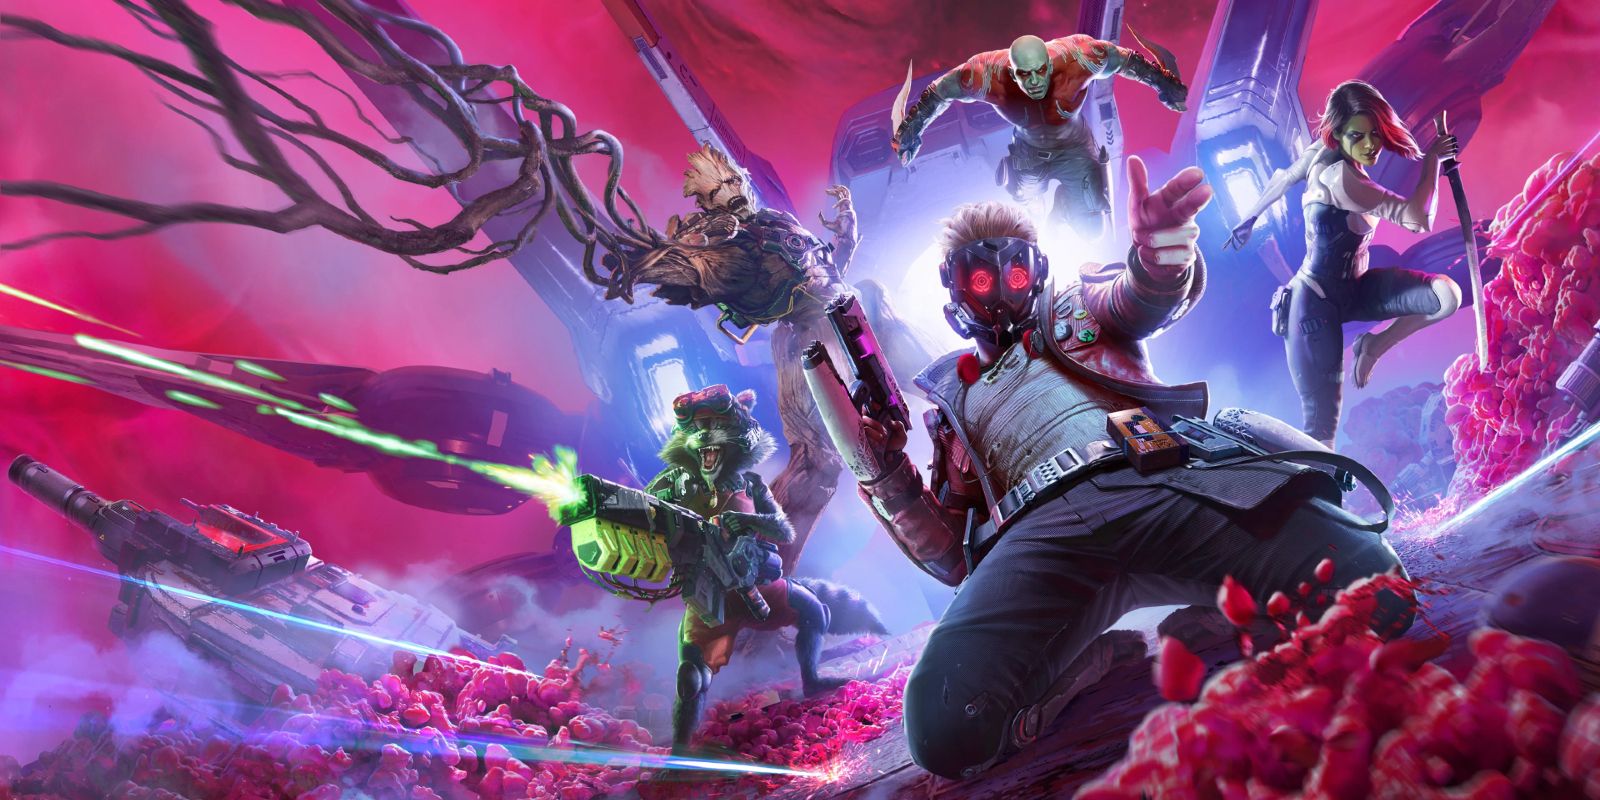 Star-Lord, Gamora, Drax the Destroyer, Rocket Raccoon, and Groot battle their way through enemies on the cover art for Marve's Guardians of the Galaxy video game